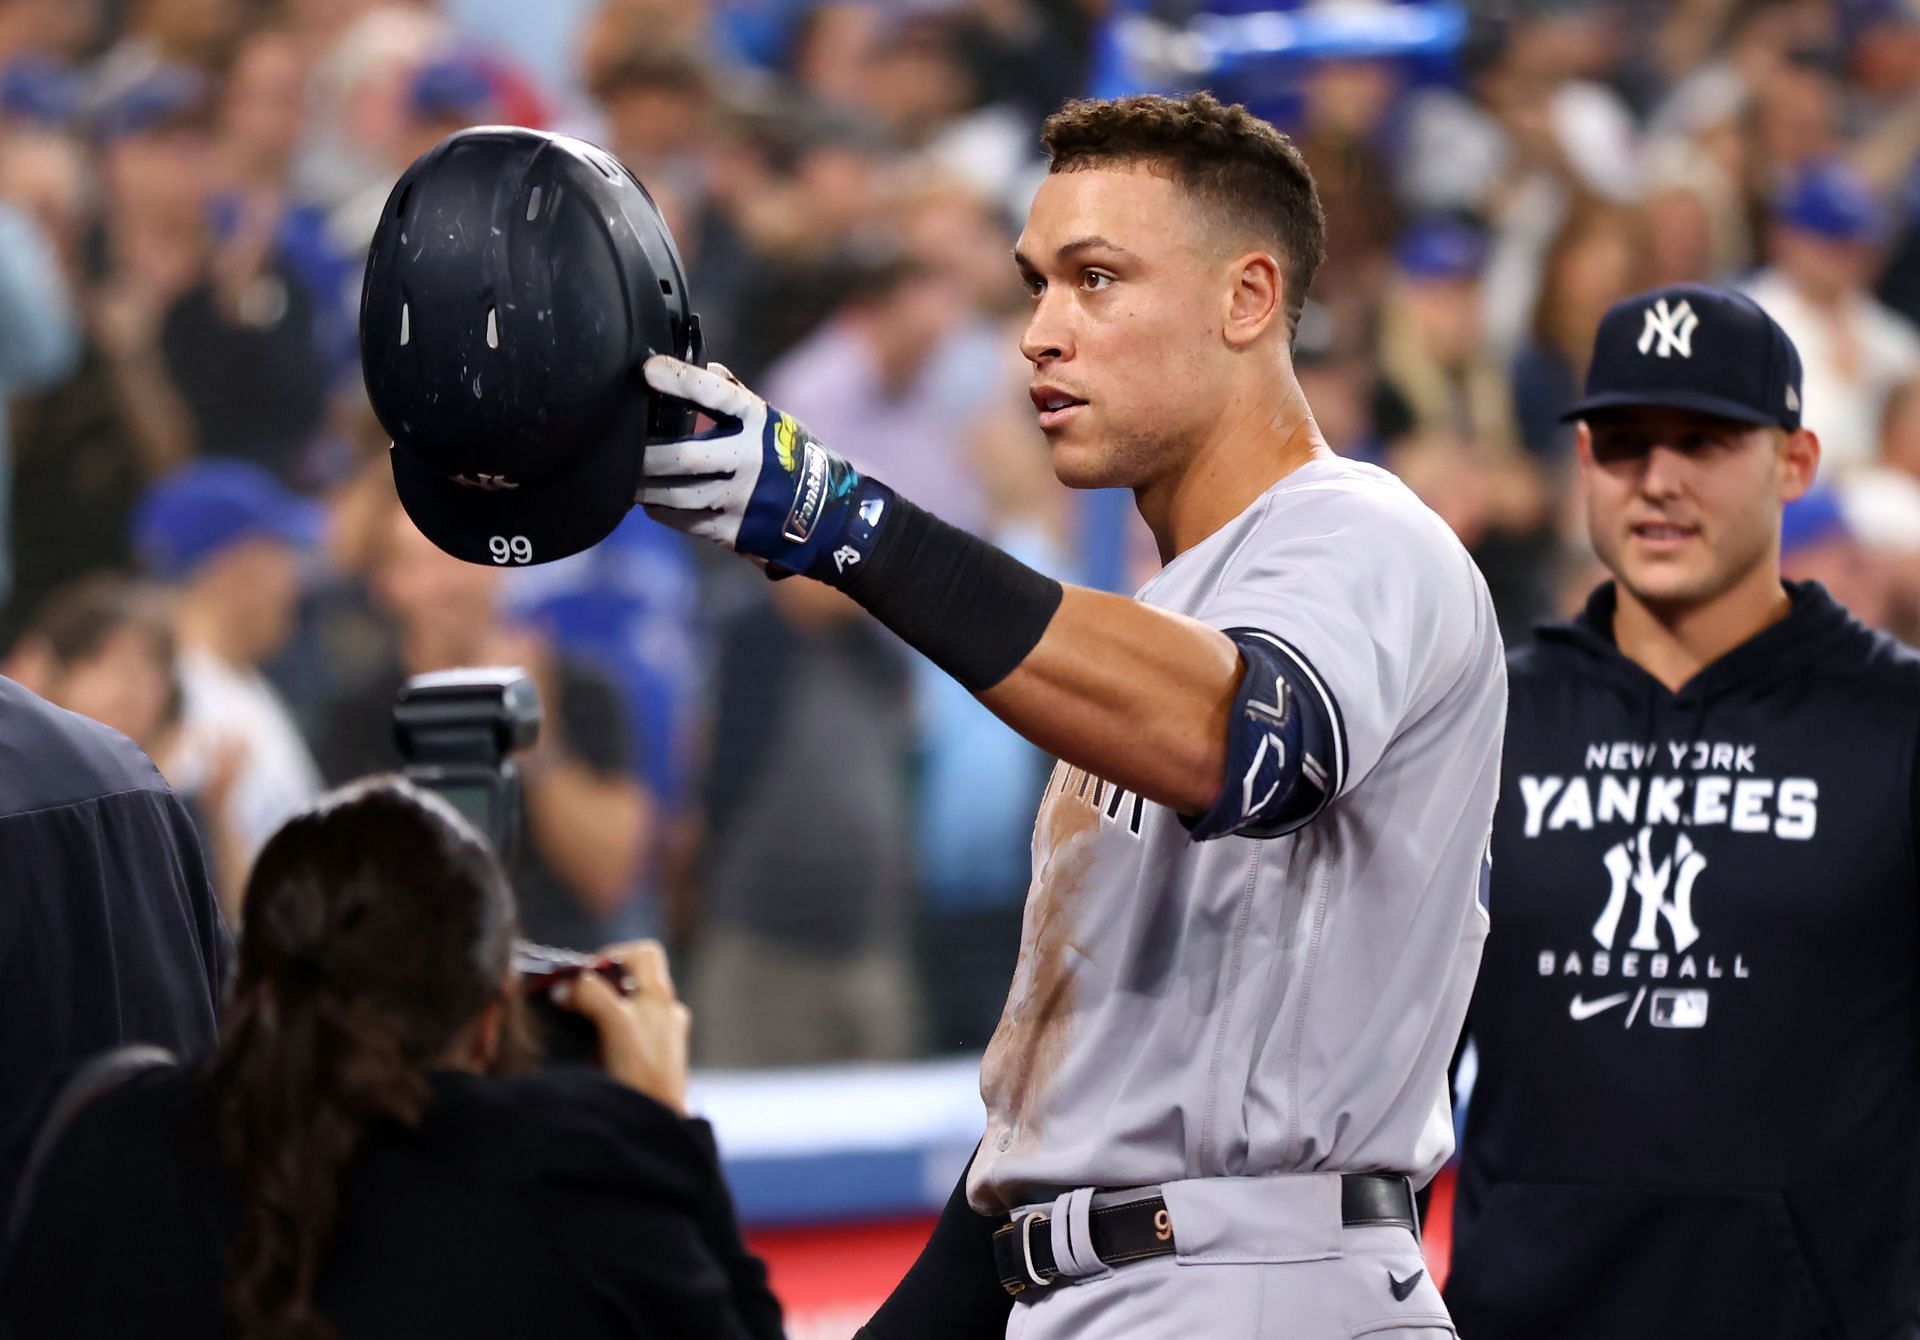 Aaron Judge contract: Signs with New York Yankees on 9-year $360M deal